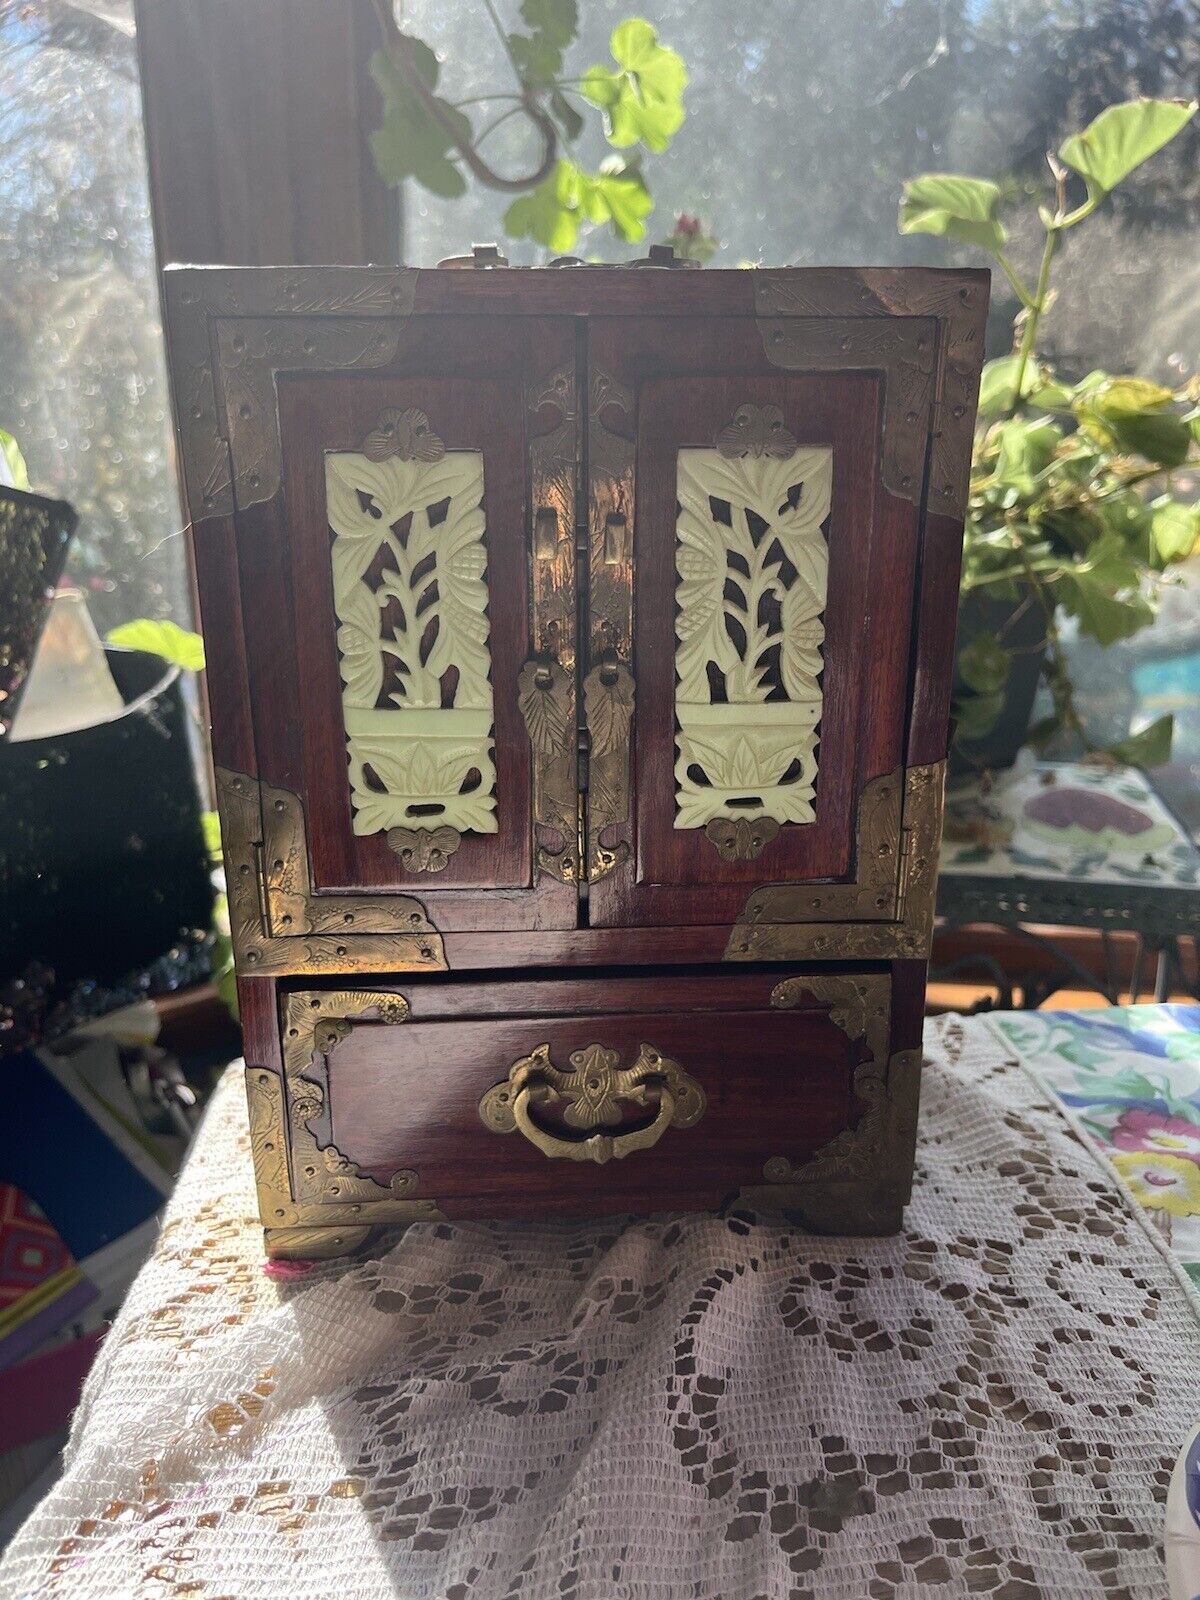 Vintage Chinese Jade Brass Wooden Jewelry Box with Drawers.